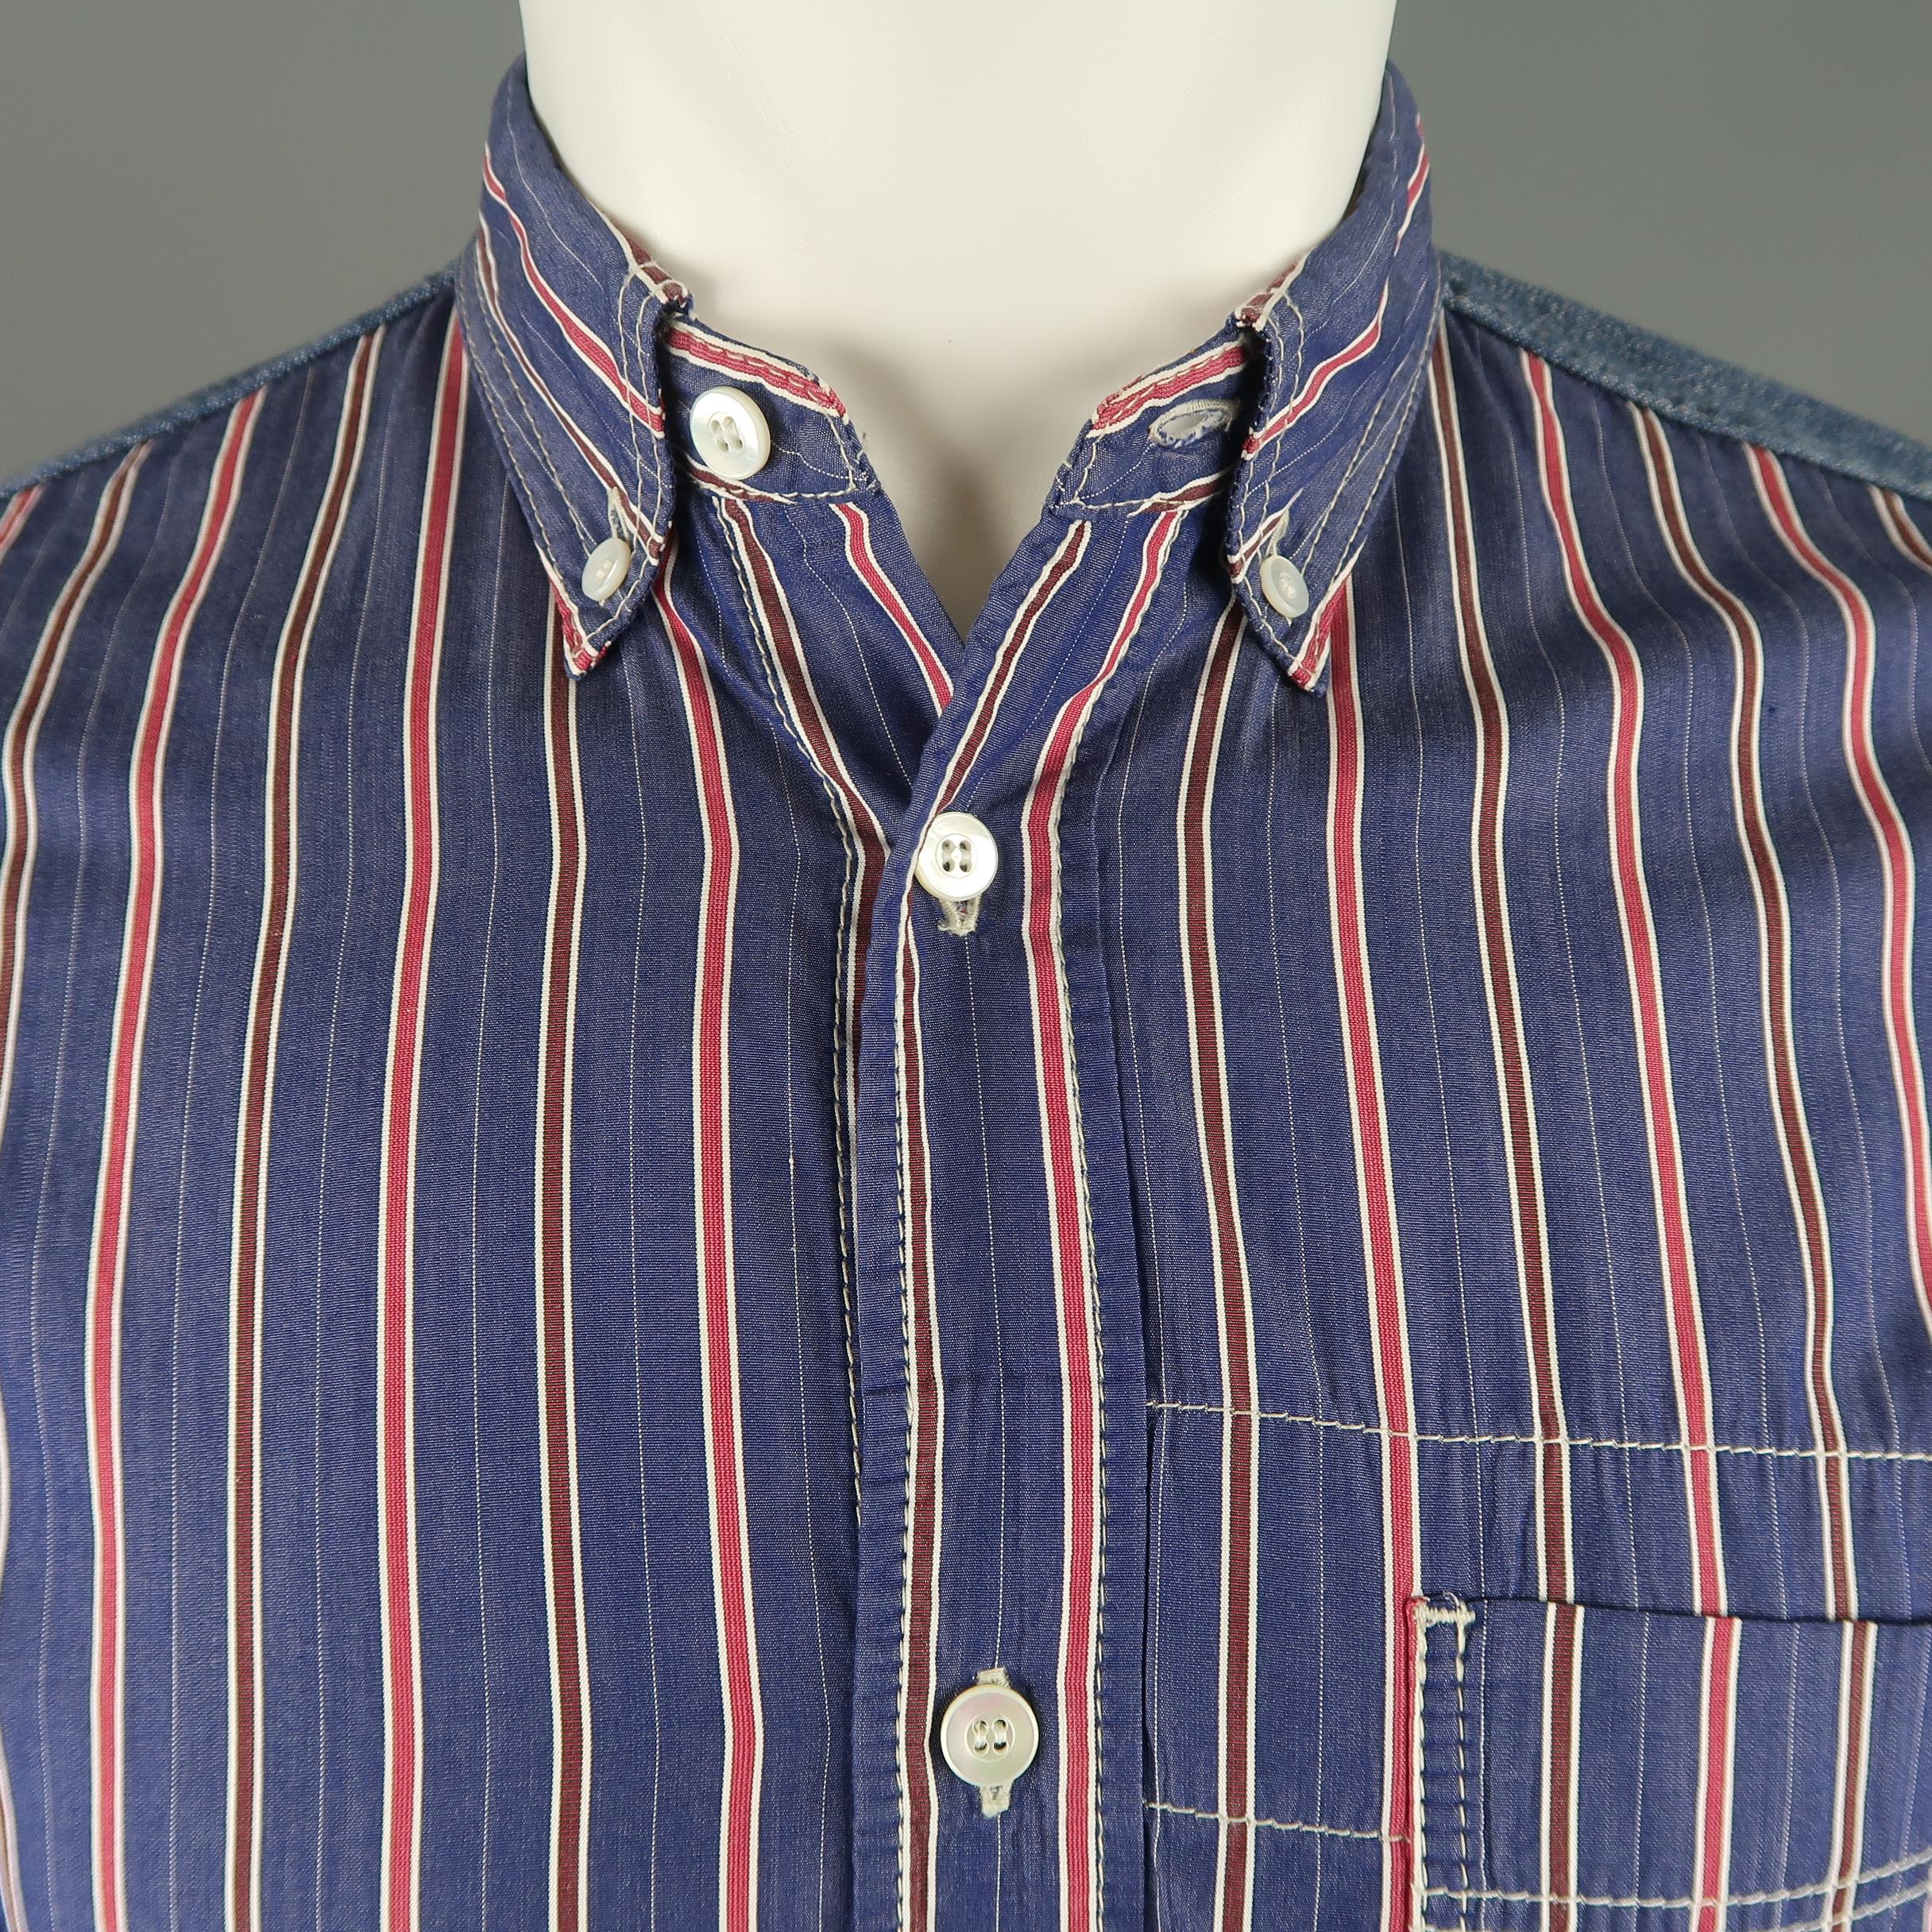 Junya Watanabe shirt comes in navy and red striped cotton with a button down collar, patch breast pocket, thick knit piping along the hem, and denim panels. Made in Japan.
 
Good Pre-Owned Condition.
Marked: S (AD 2012)
 
Measurements:
 
Shoulder: